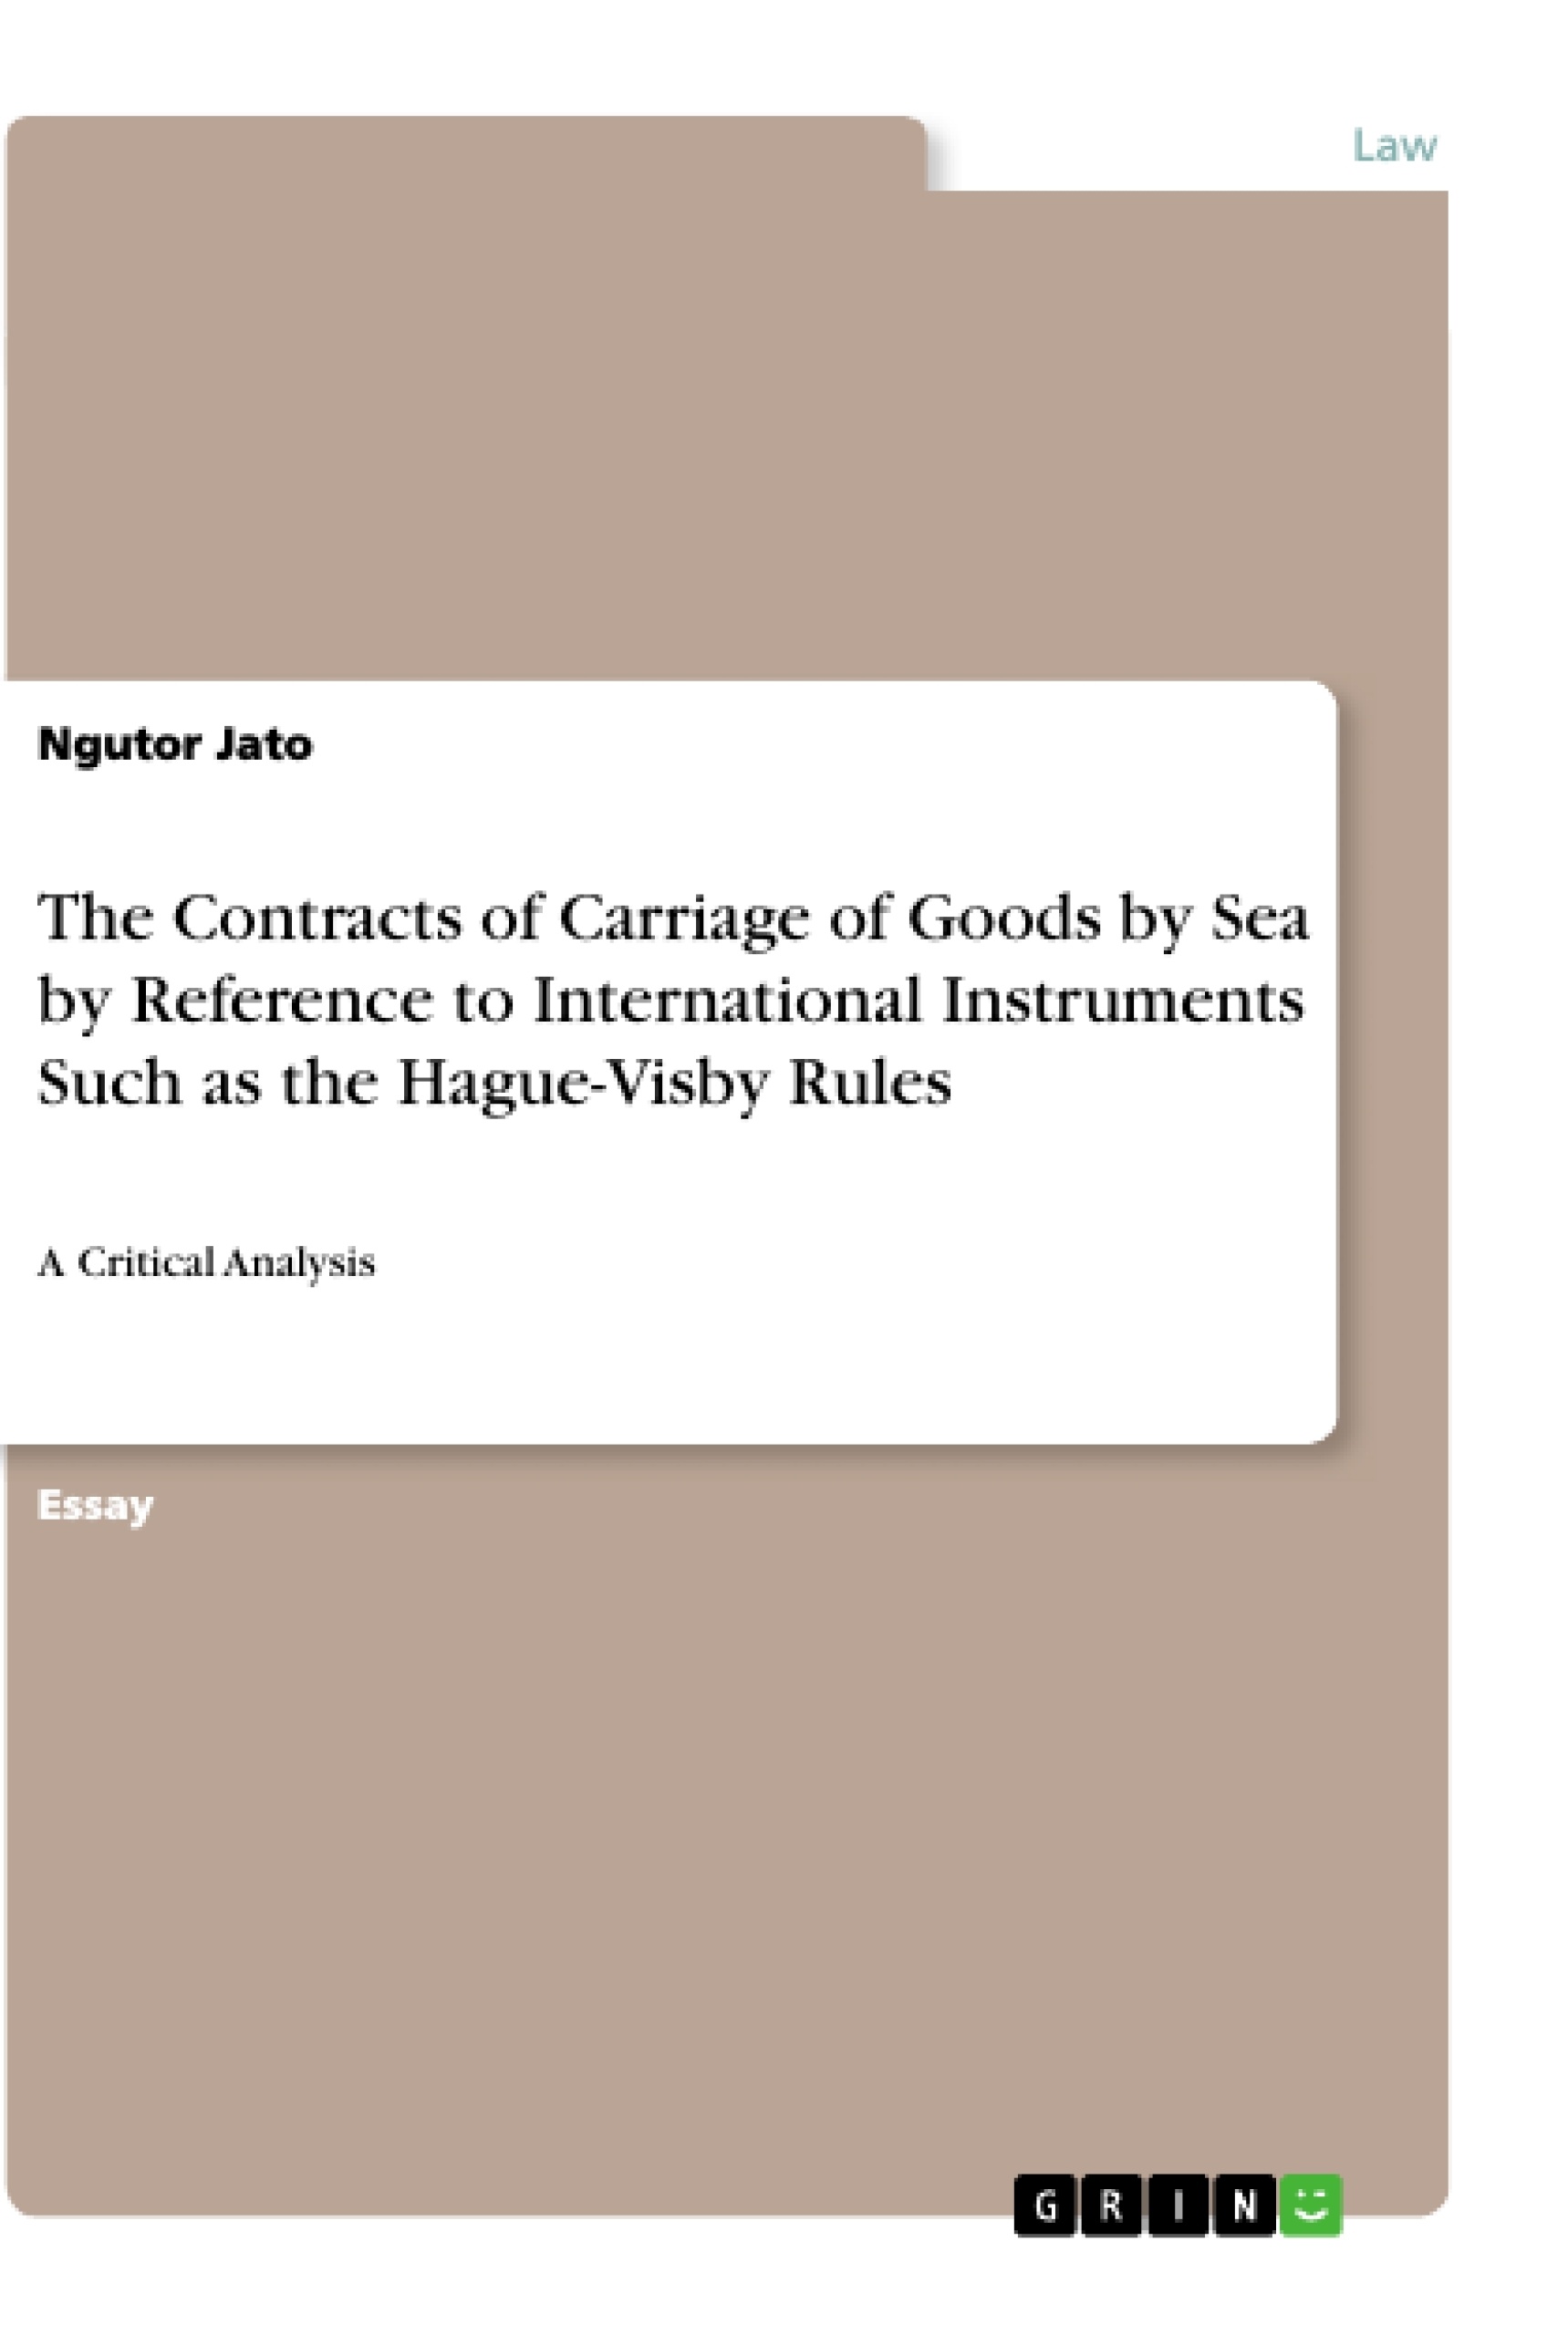 Título: The Contracts of Carriage of Goods by Sea by Reference to International Instruments Such as the Hague-Visby Rules